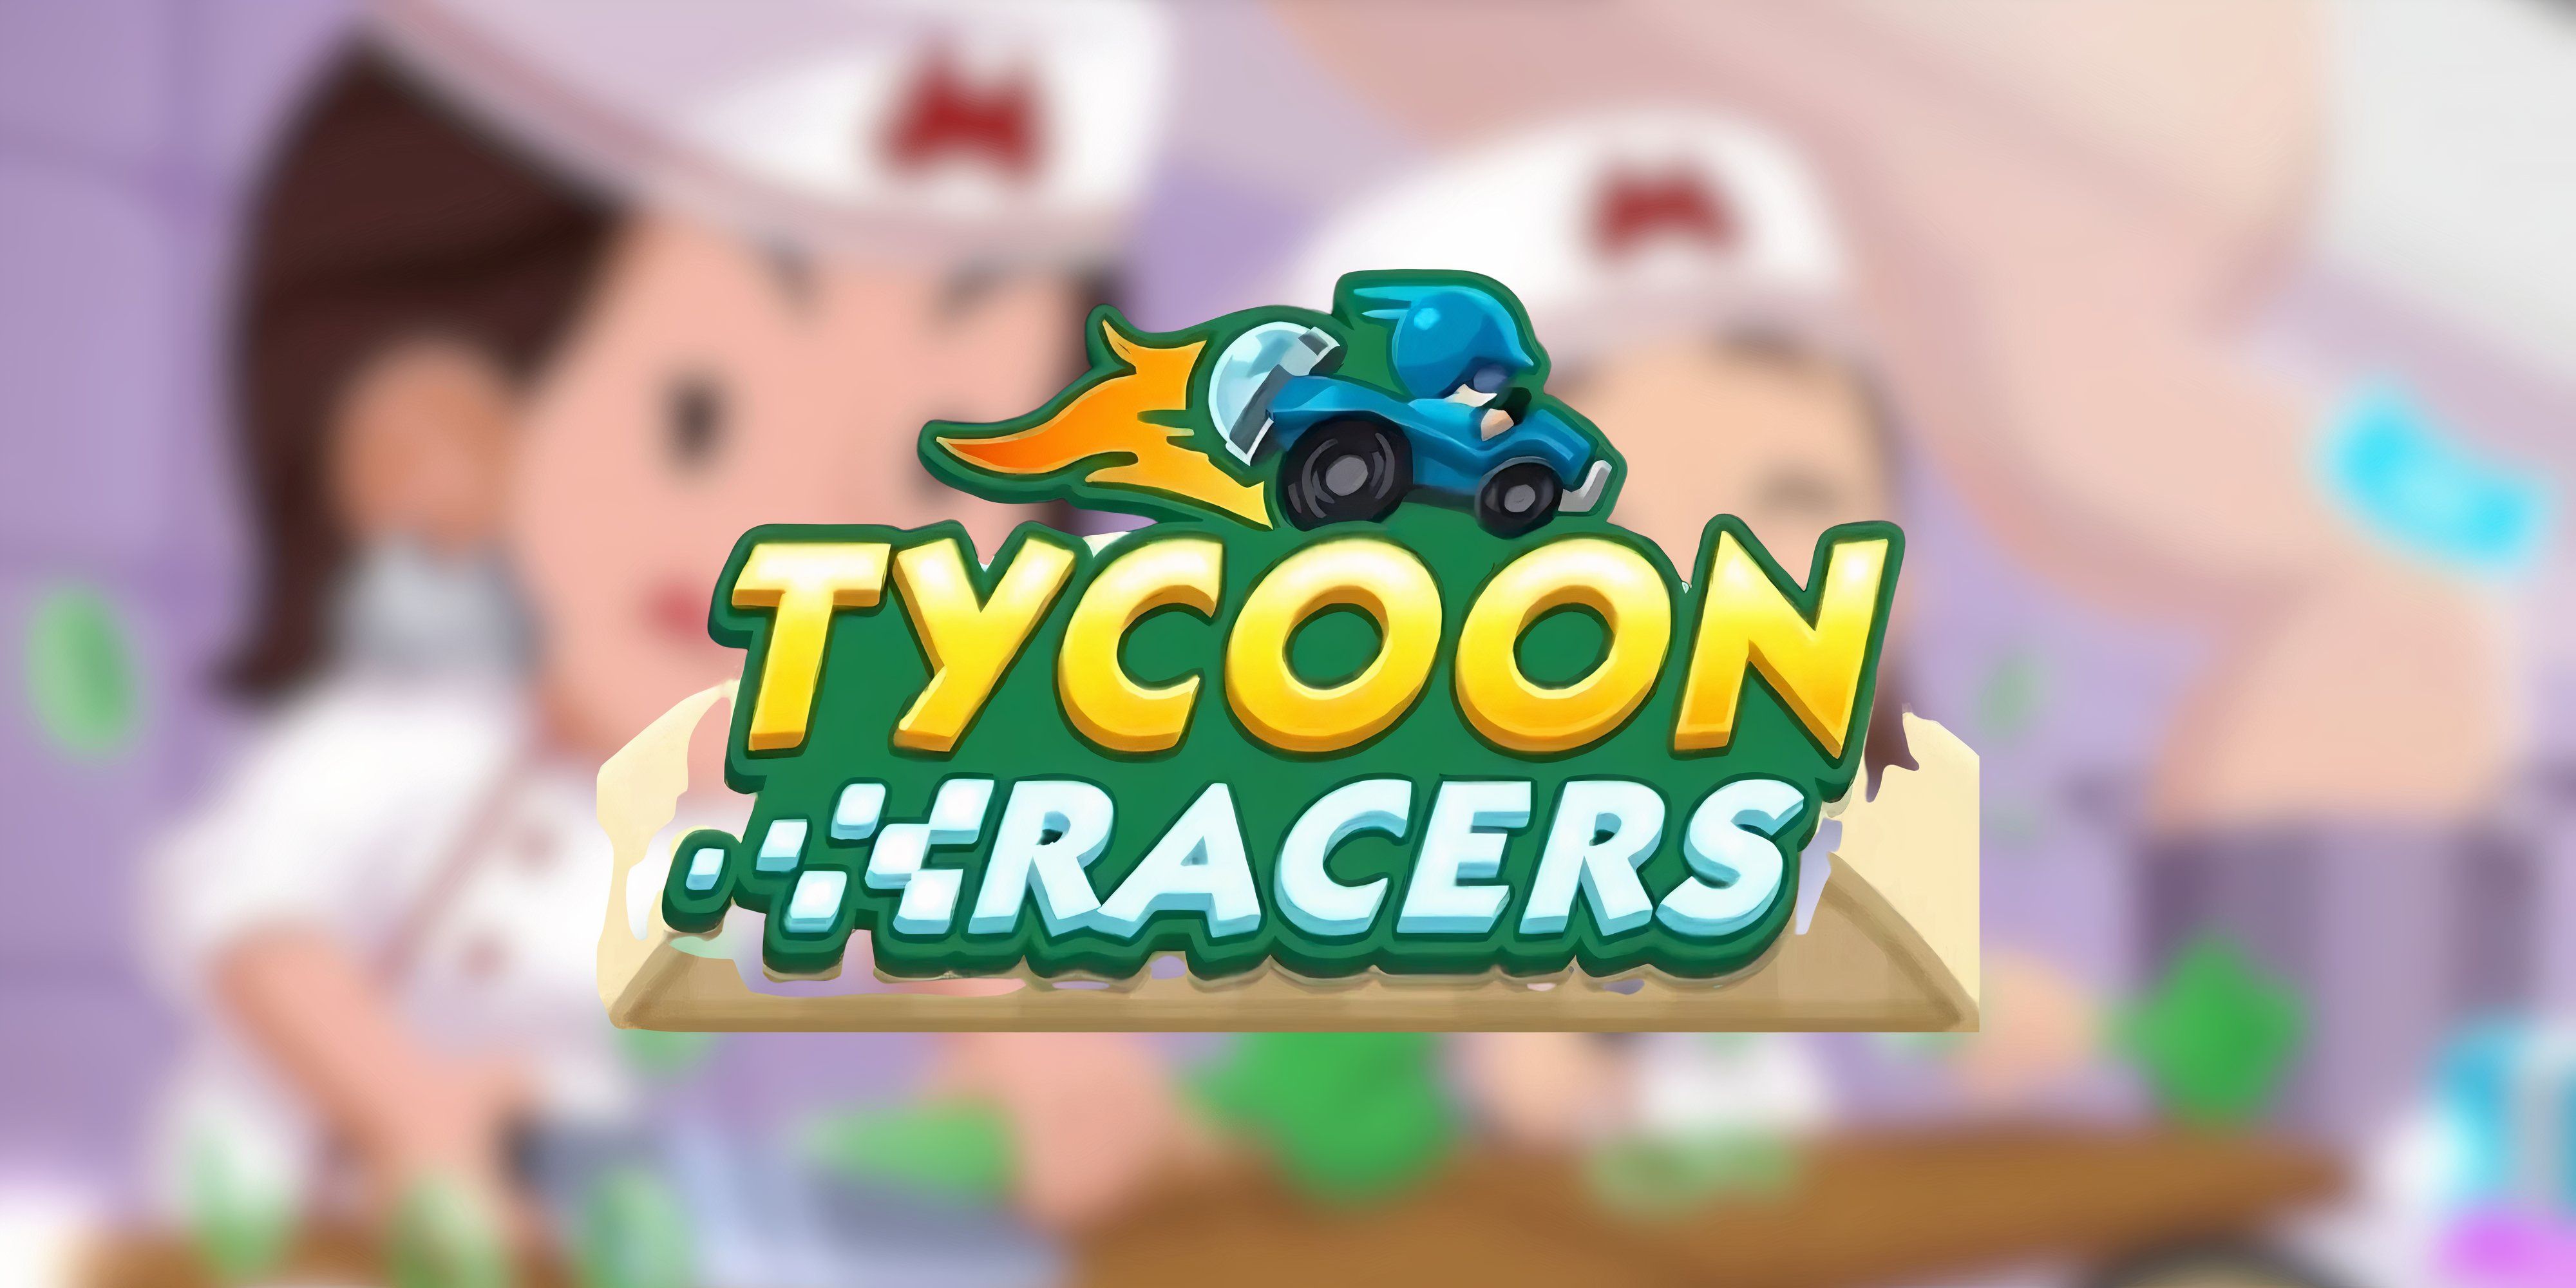 Tycoon racers logo in Monopoly Go overlayed over an image